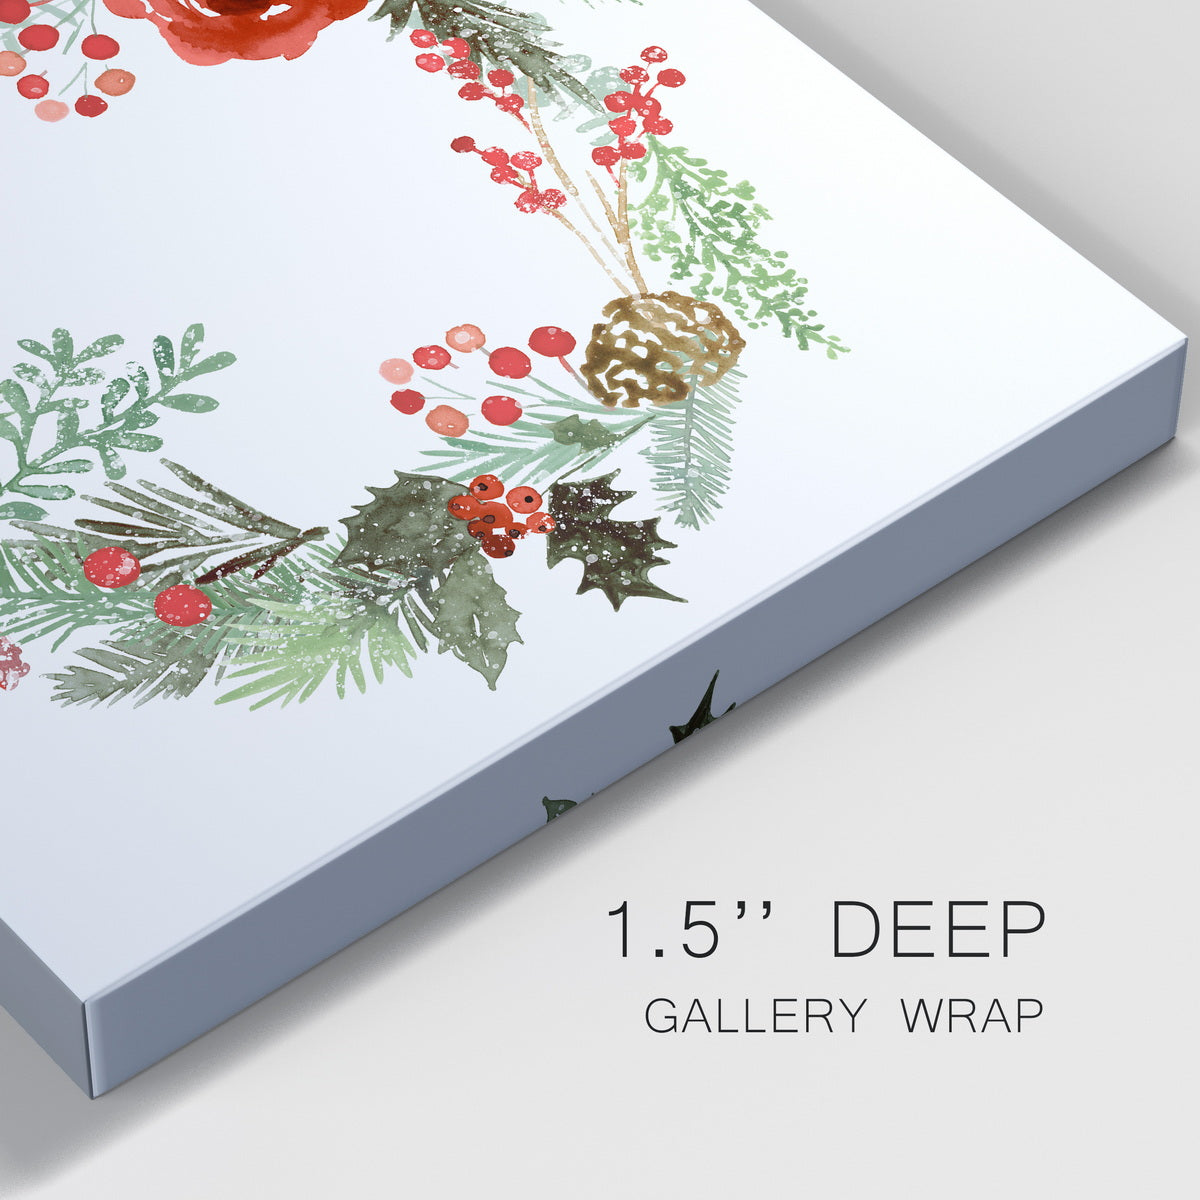 Winter Visitor Collection C-Premium Gallery Wrapped Canvas - Ready to Hang